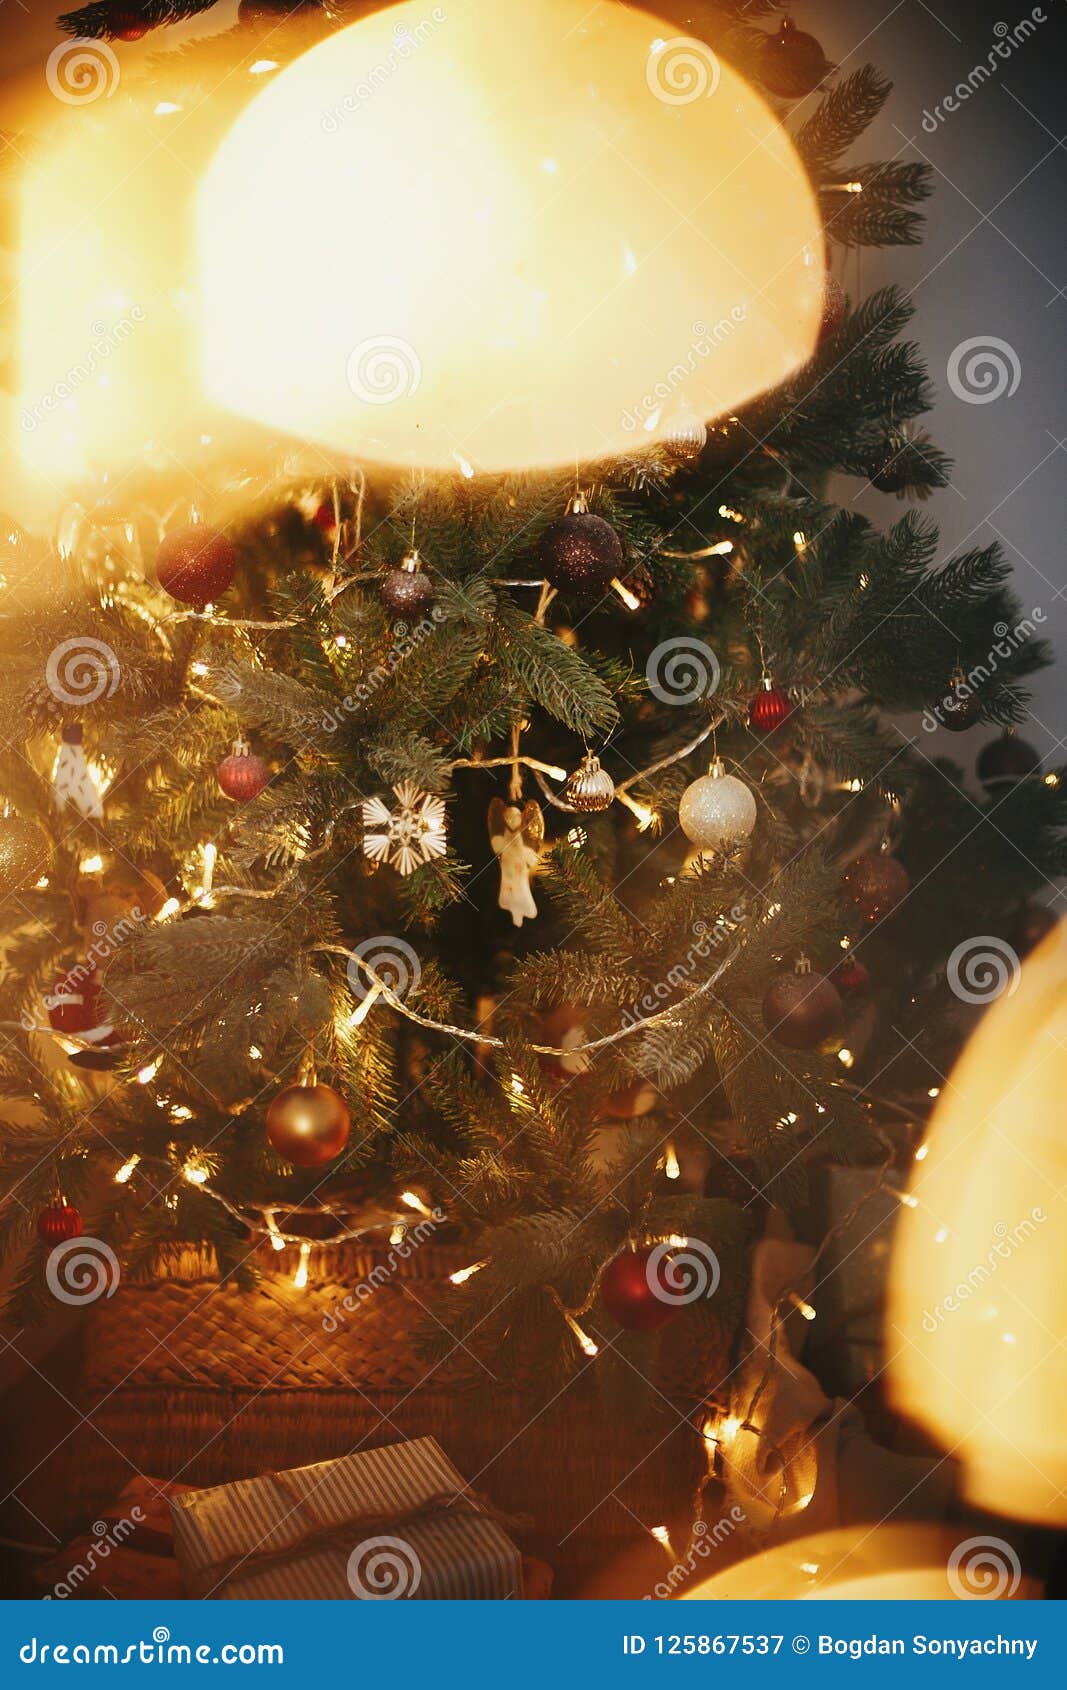 Beautiful Christmas Tree with Ornaments, Golden Lights and Presents in ...